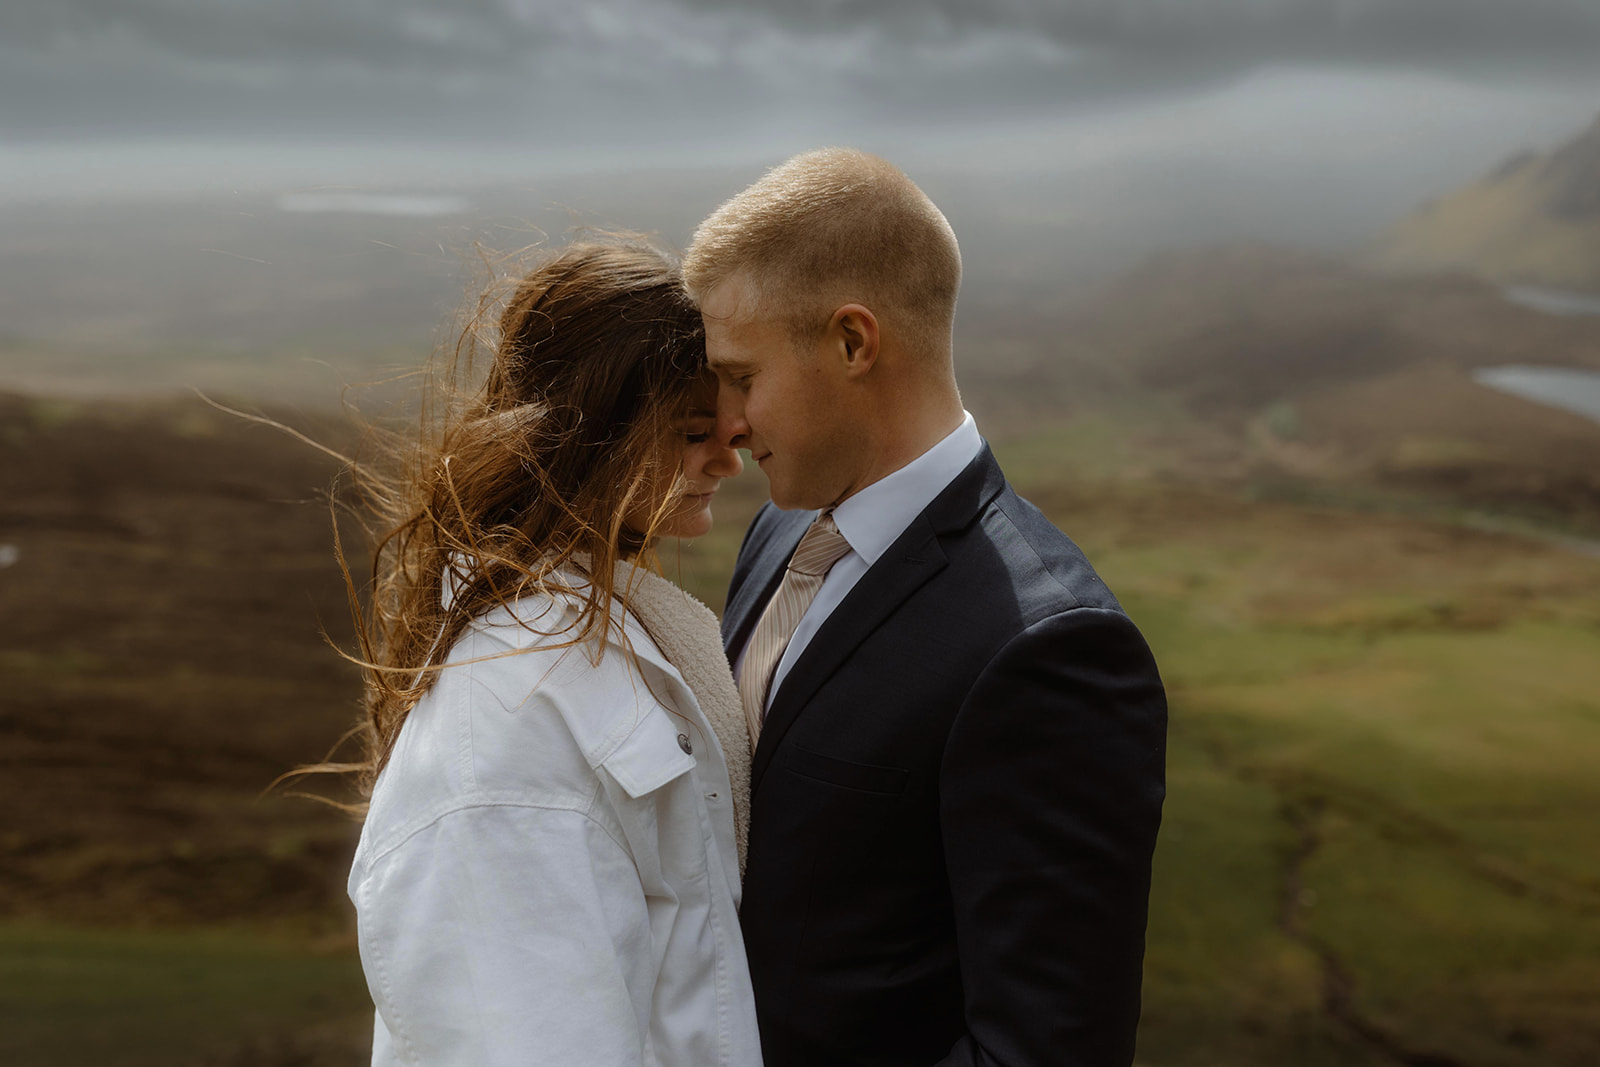 Emma and Matthew share a loving gaze on their Isle of Skye elopement day, capturing their deep connection.